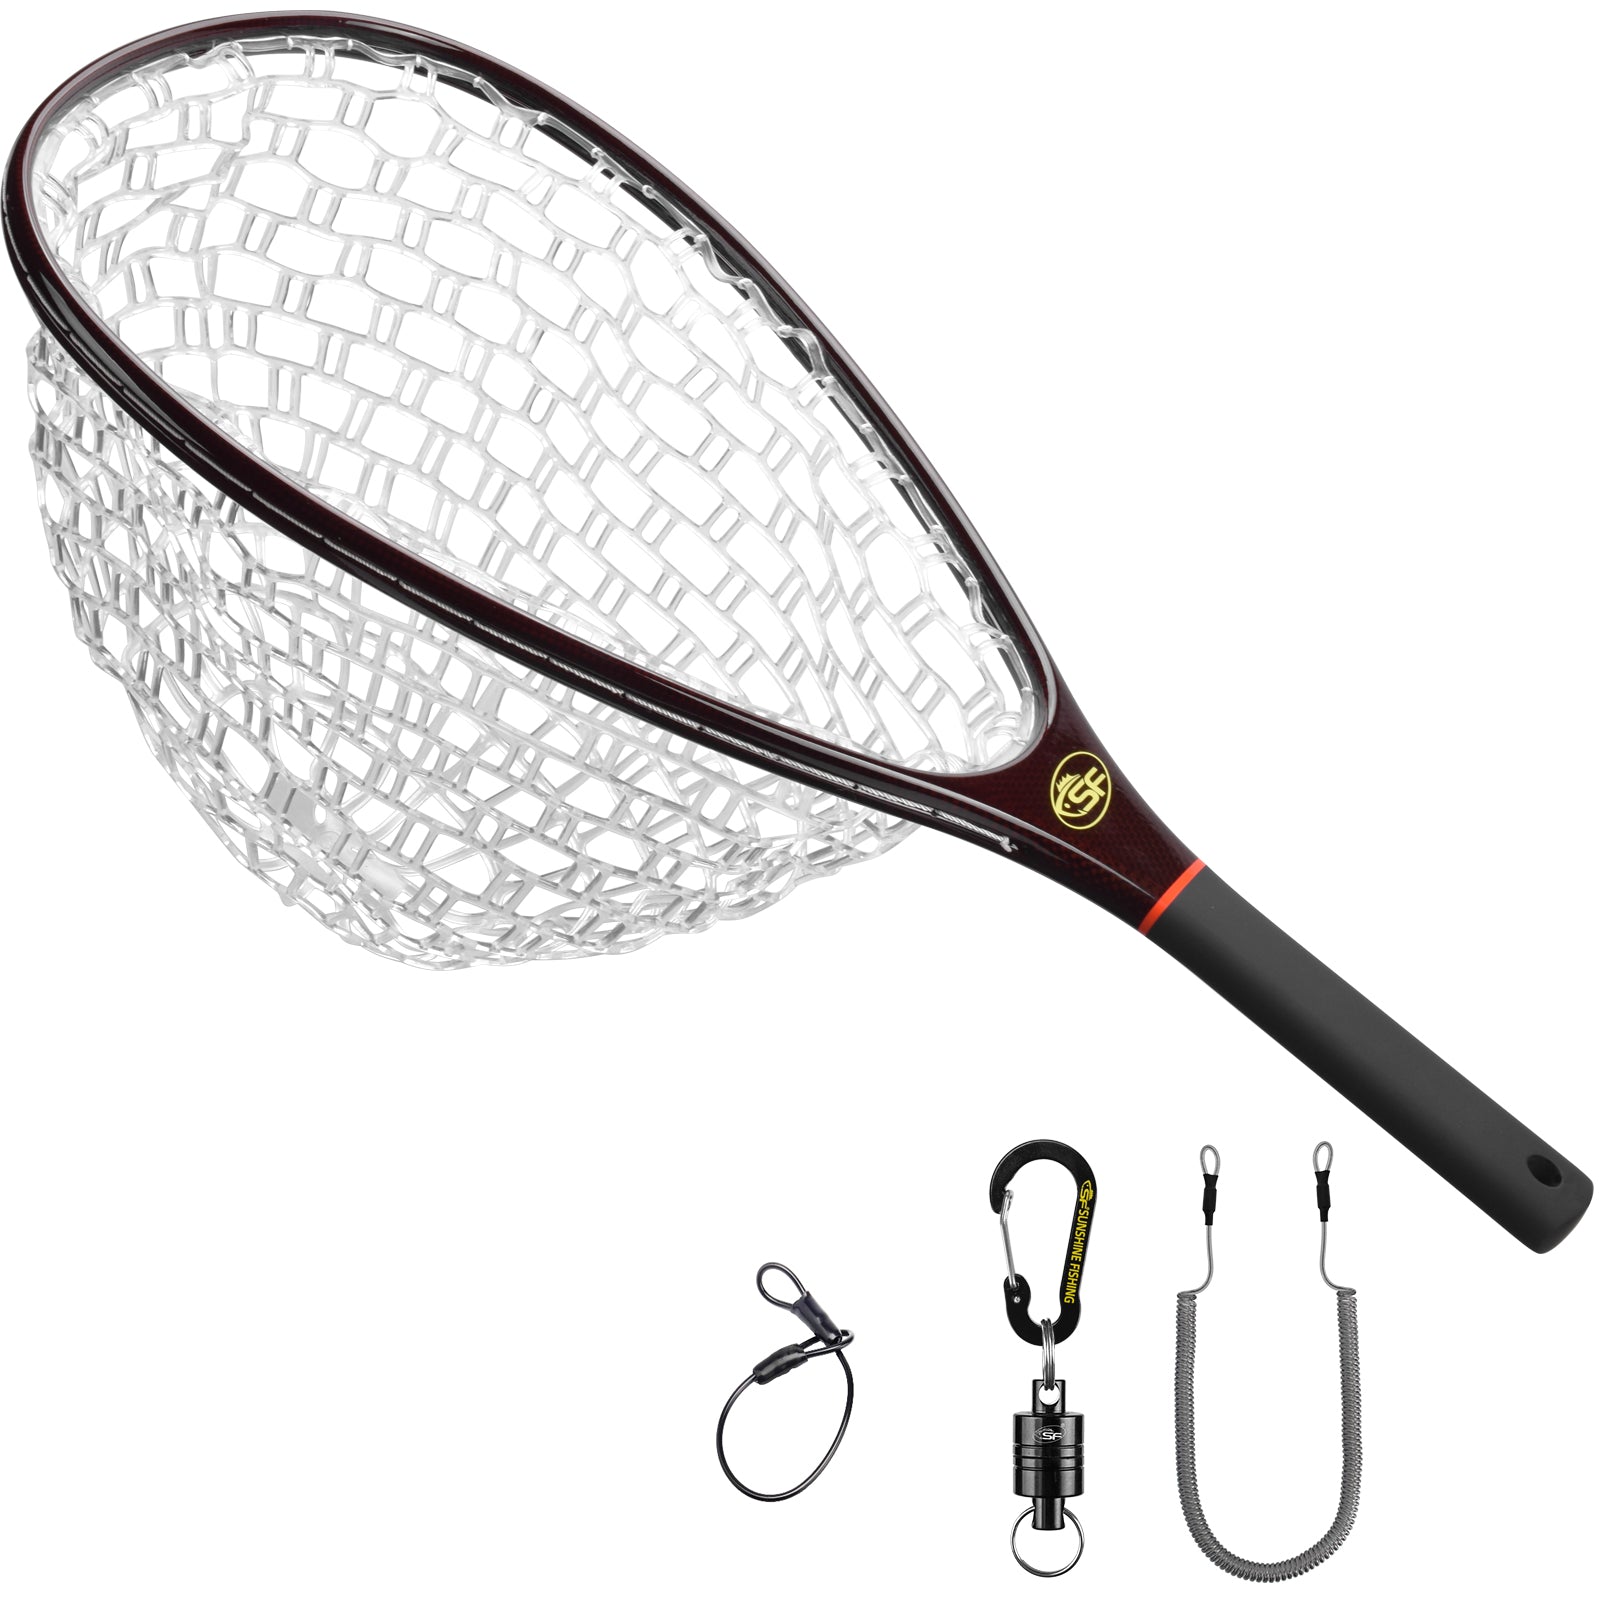 Fly Fishing Nets for Sale - Online Fly Fishing Store